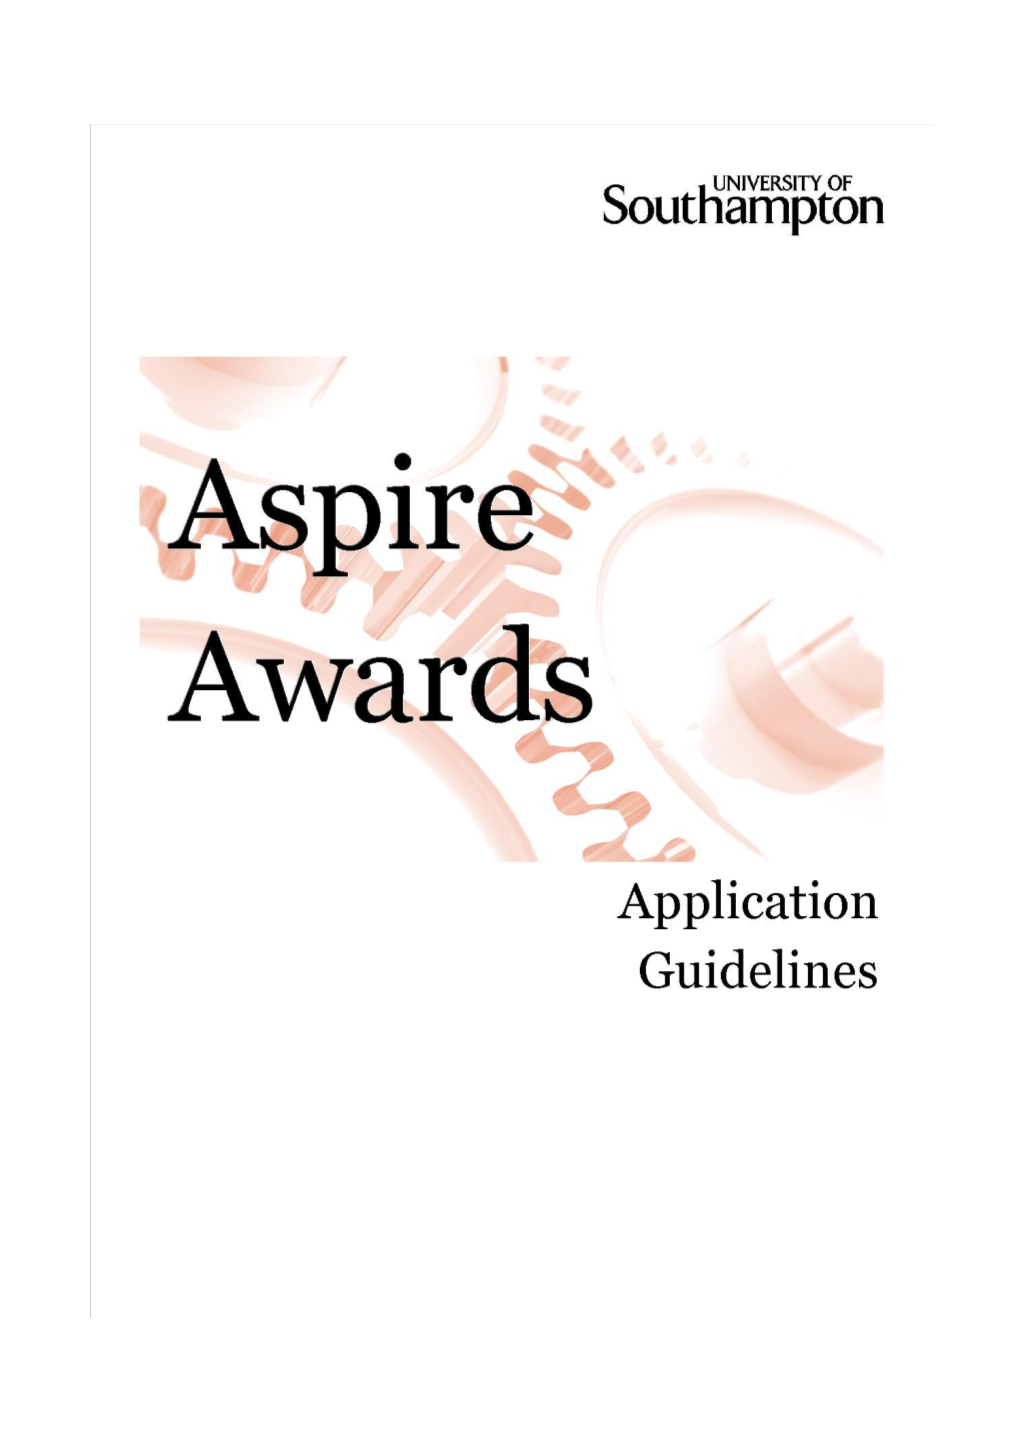 What Are Aspire Awards?